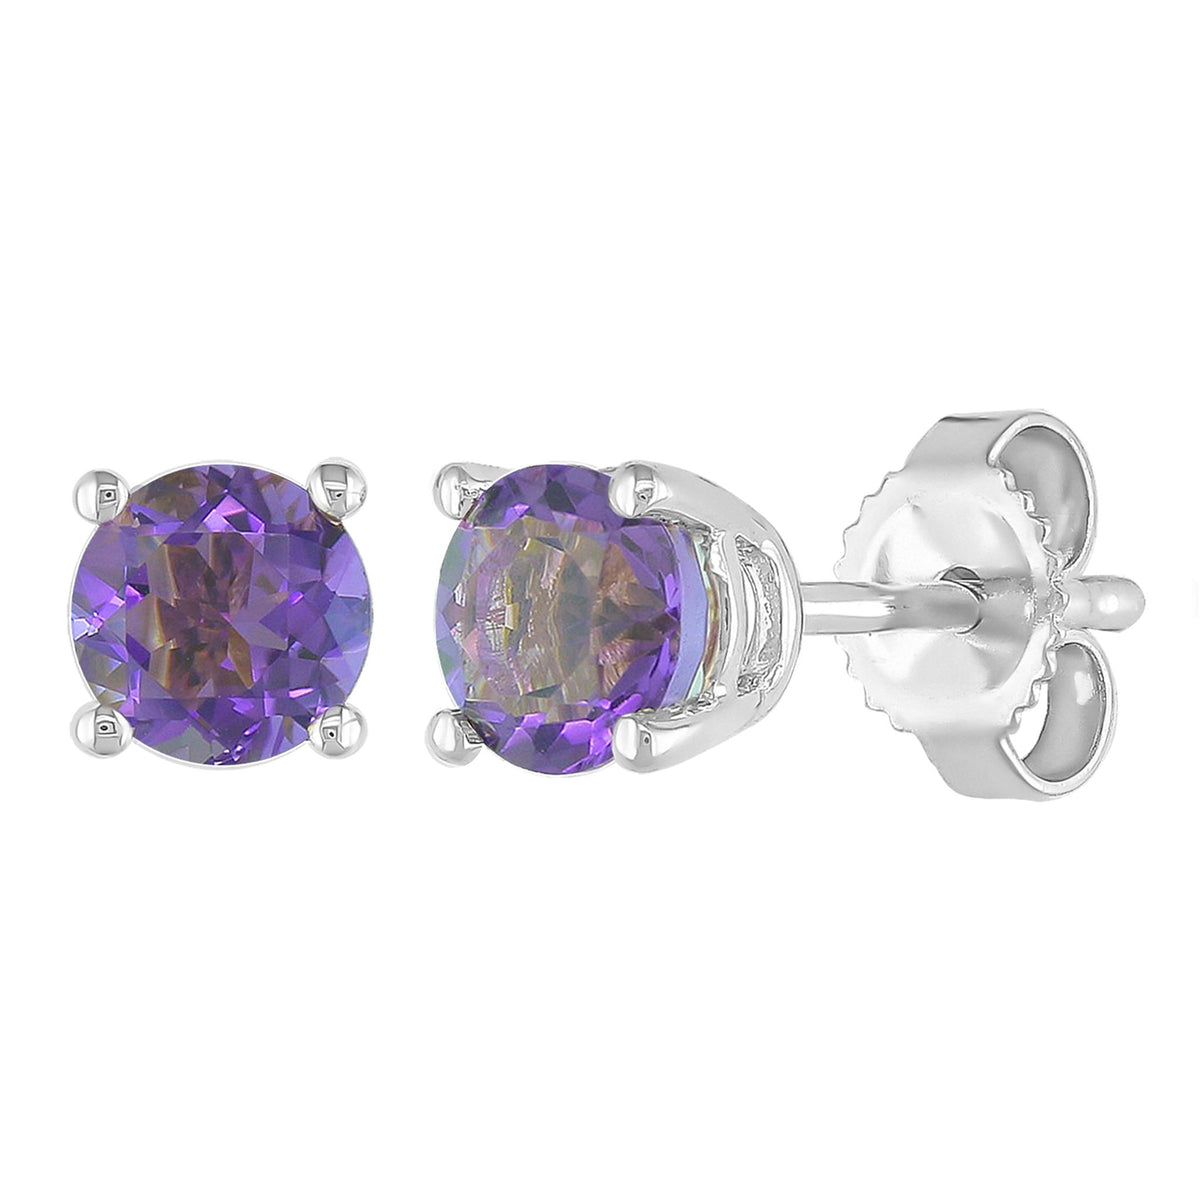 14Kt White Gold Stud Earrings With 5mm Amethyst